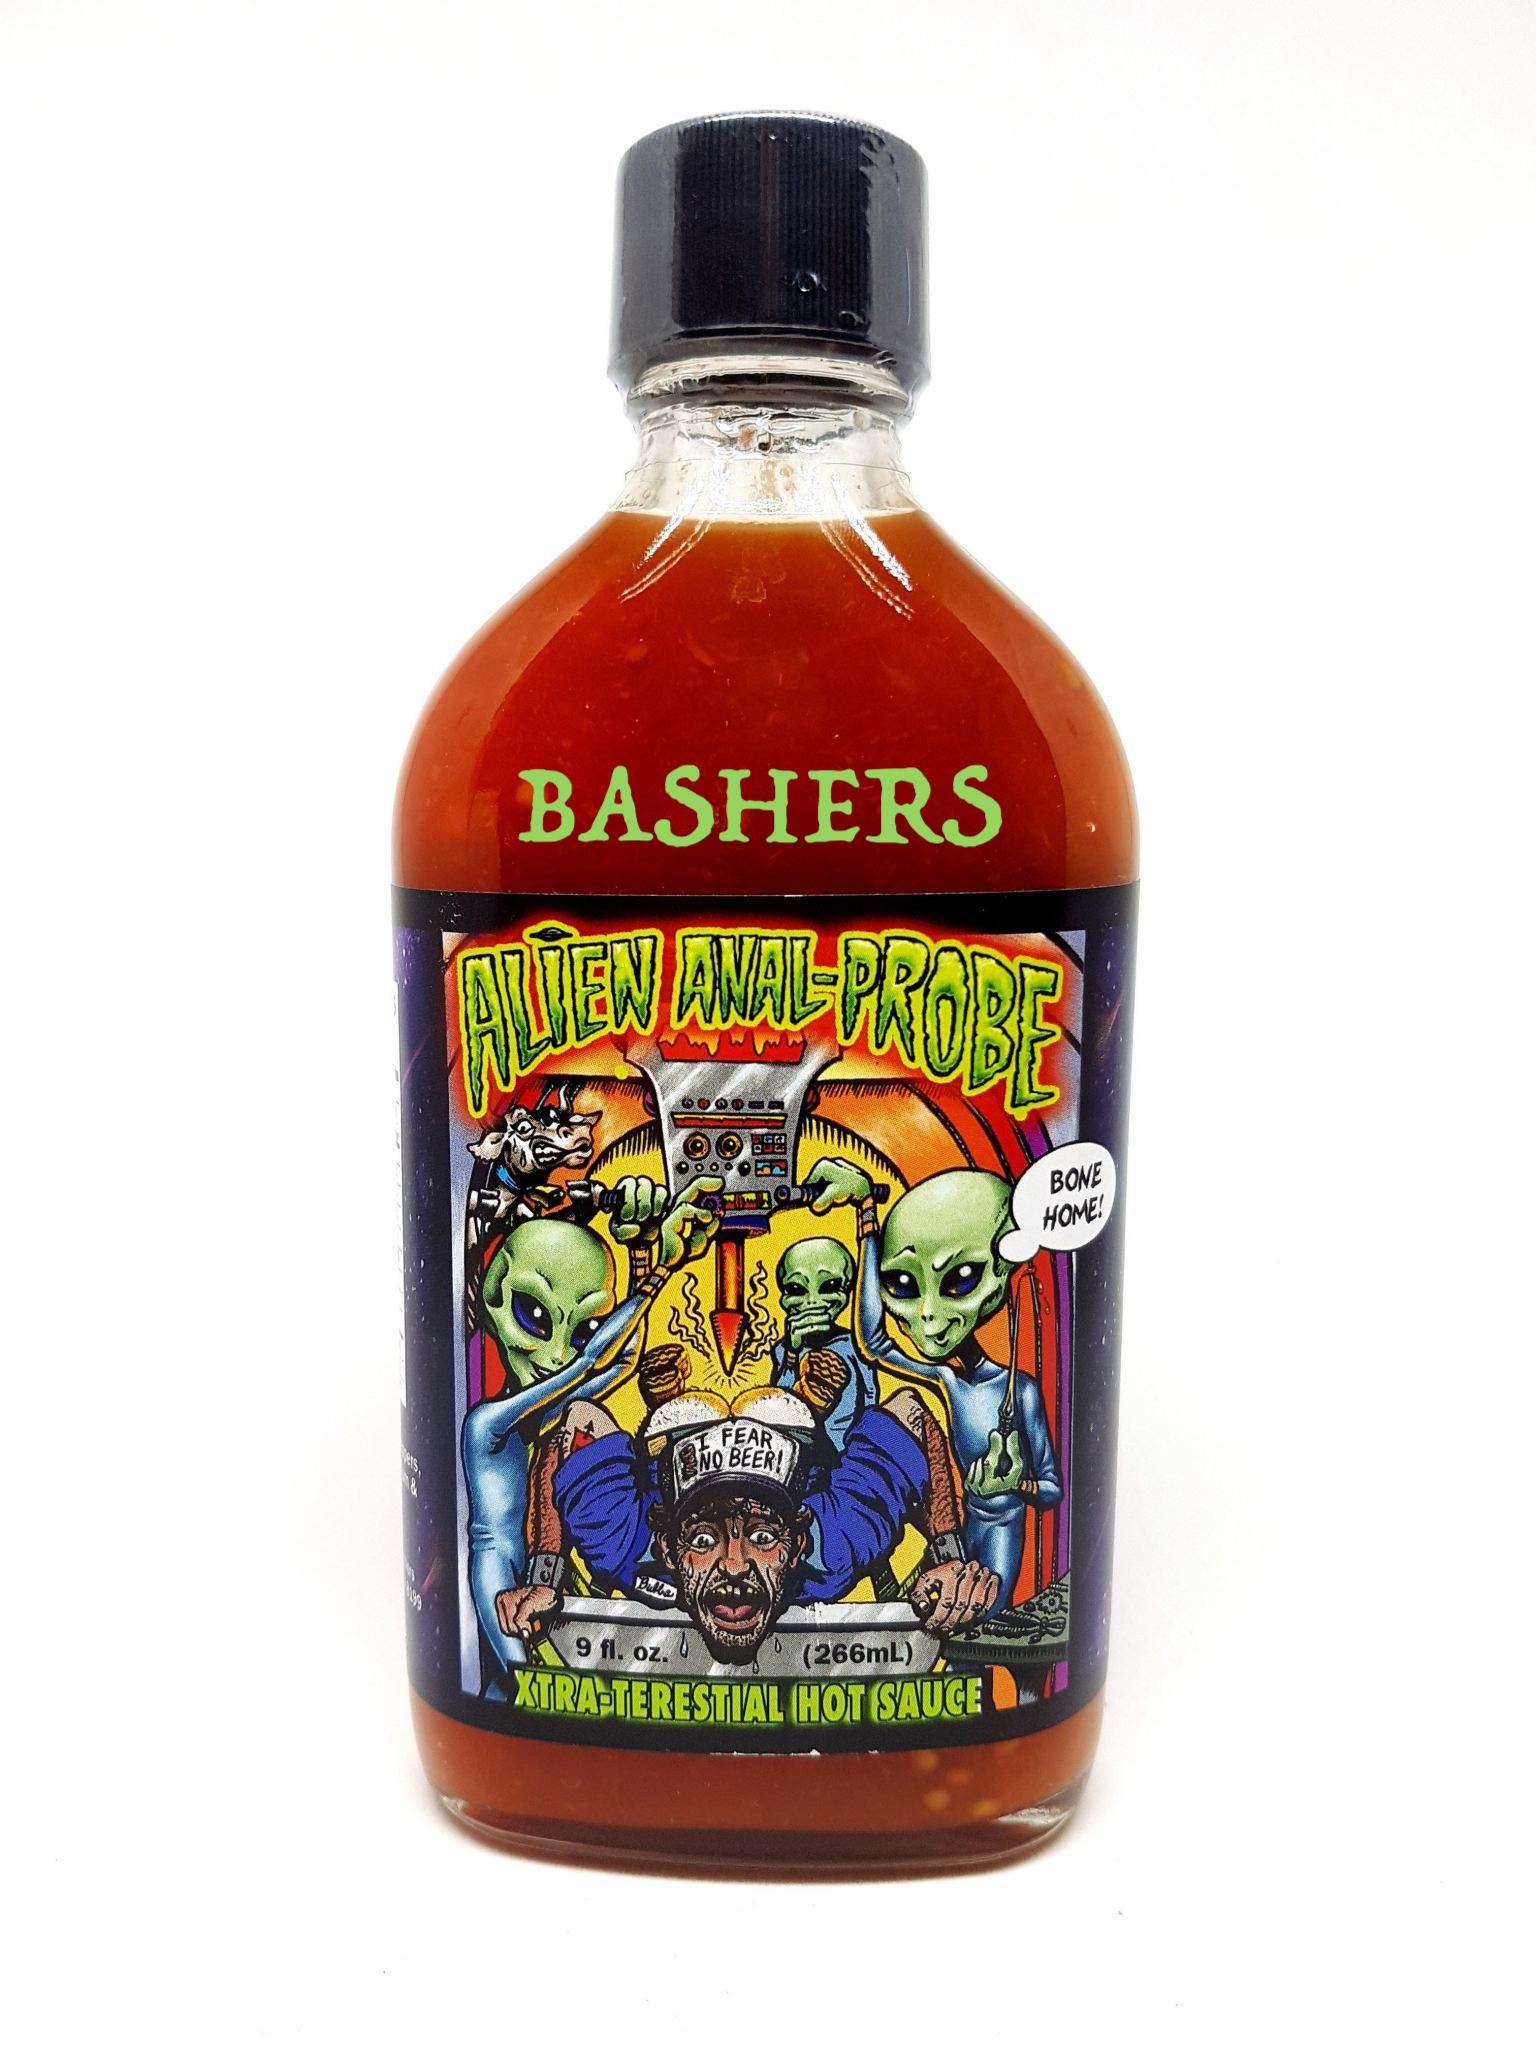 1767415329_alien-anal-probe-cayenne-xtra-terestial-hot-sauce-pepper-heat-level-03-shoelace-exclude-peppers-chilly-chiles-largest-selection-of-in-canada-sauces-condiment_393.jpg